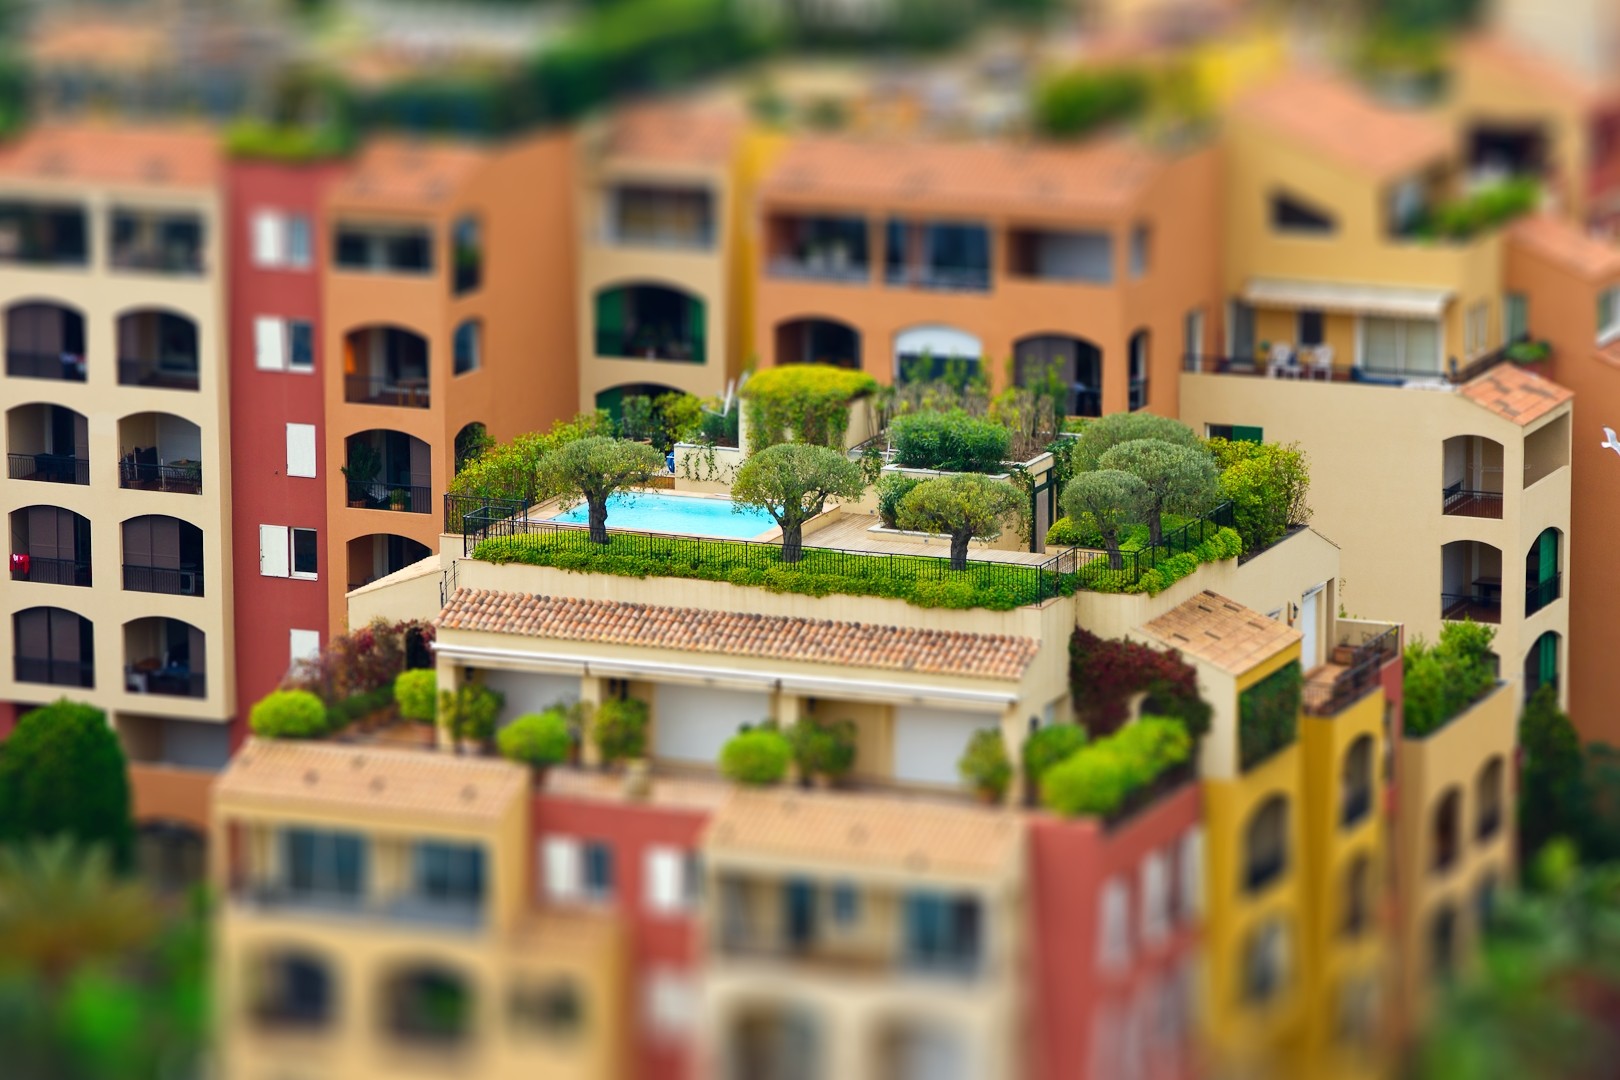 General 1620x1080 house tilt shift town trees rooftops arch window colorful swimming pool Architecture models digital art